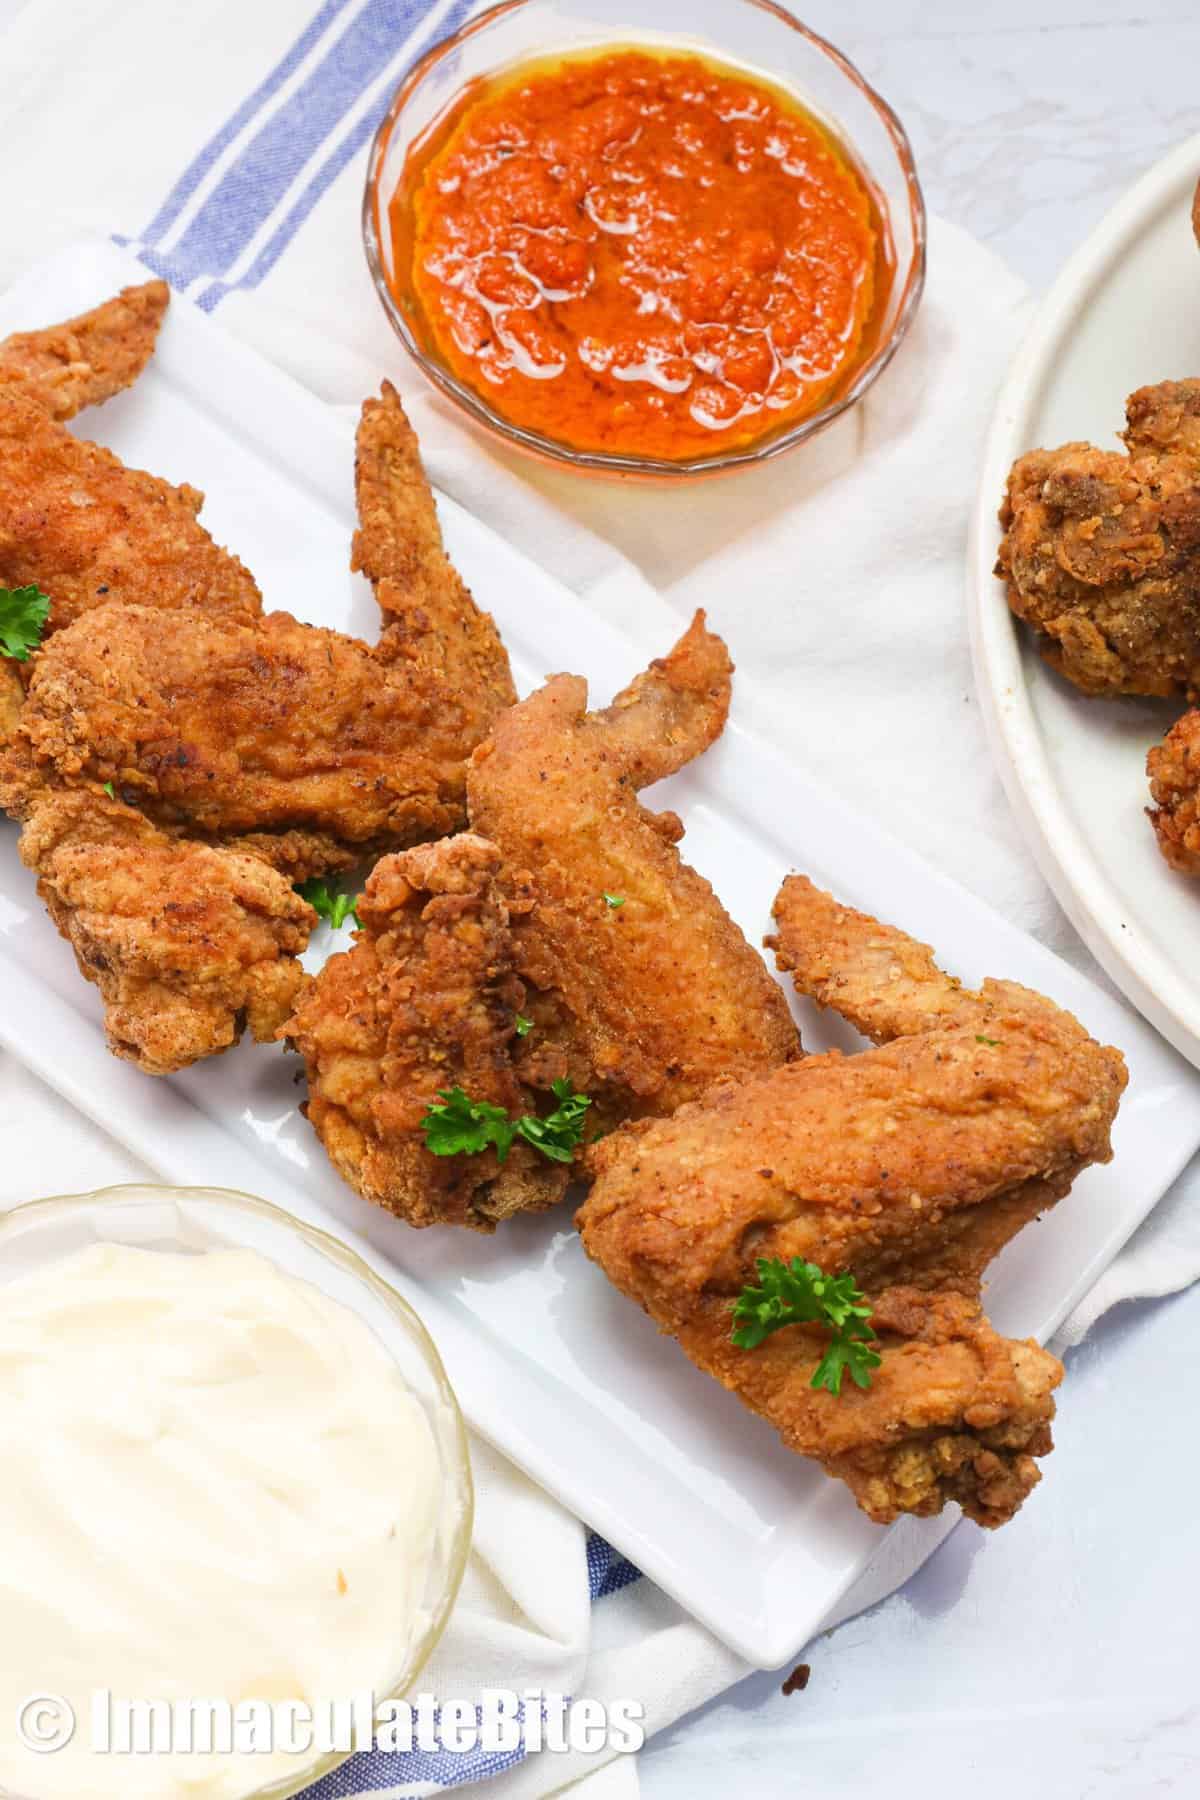 Four fried chicken wings on a white rectangular plate with hot sauce and remoulade on the side